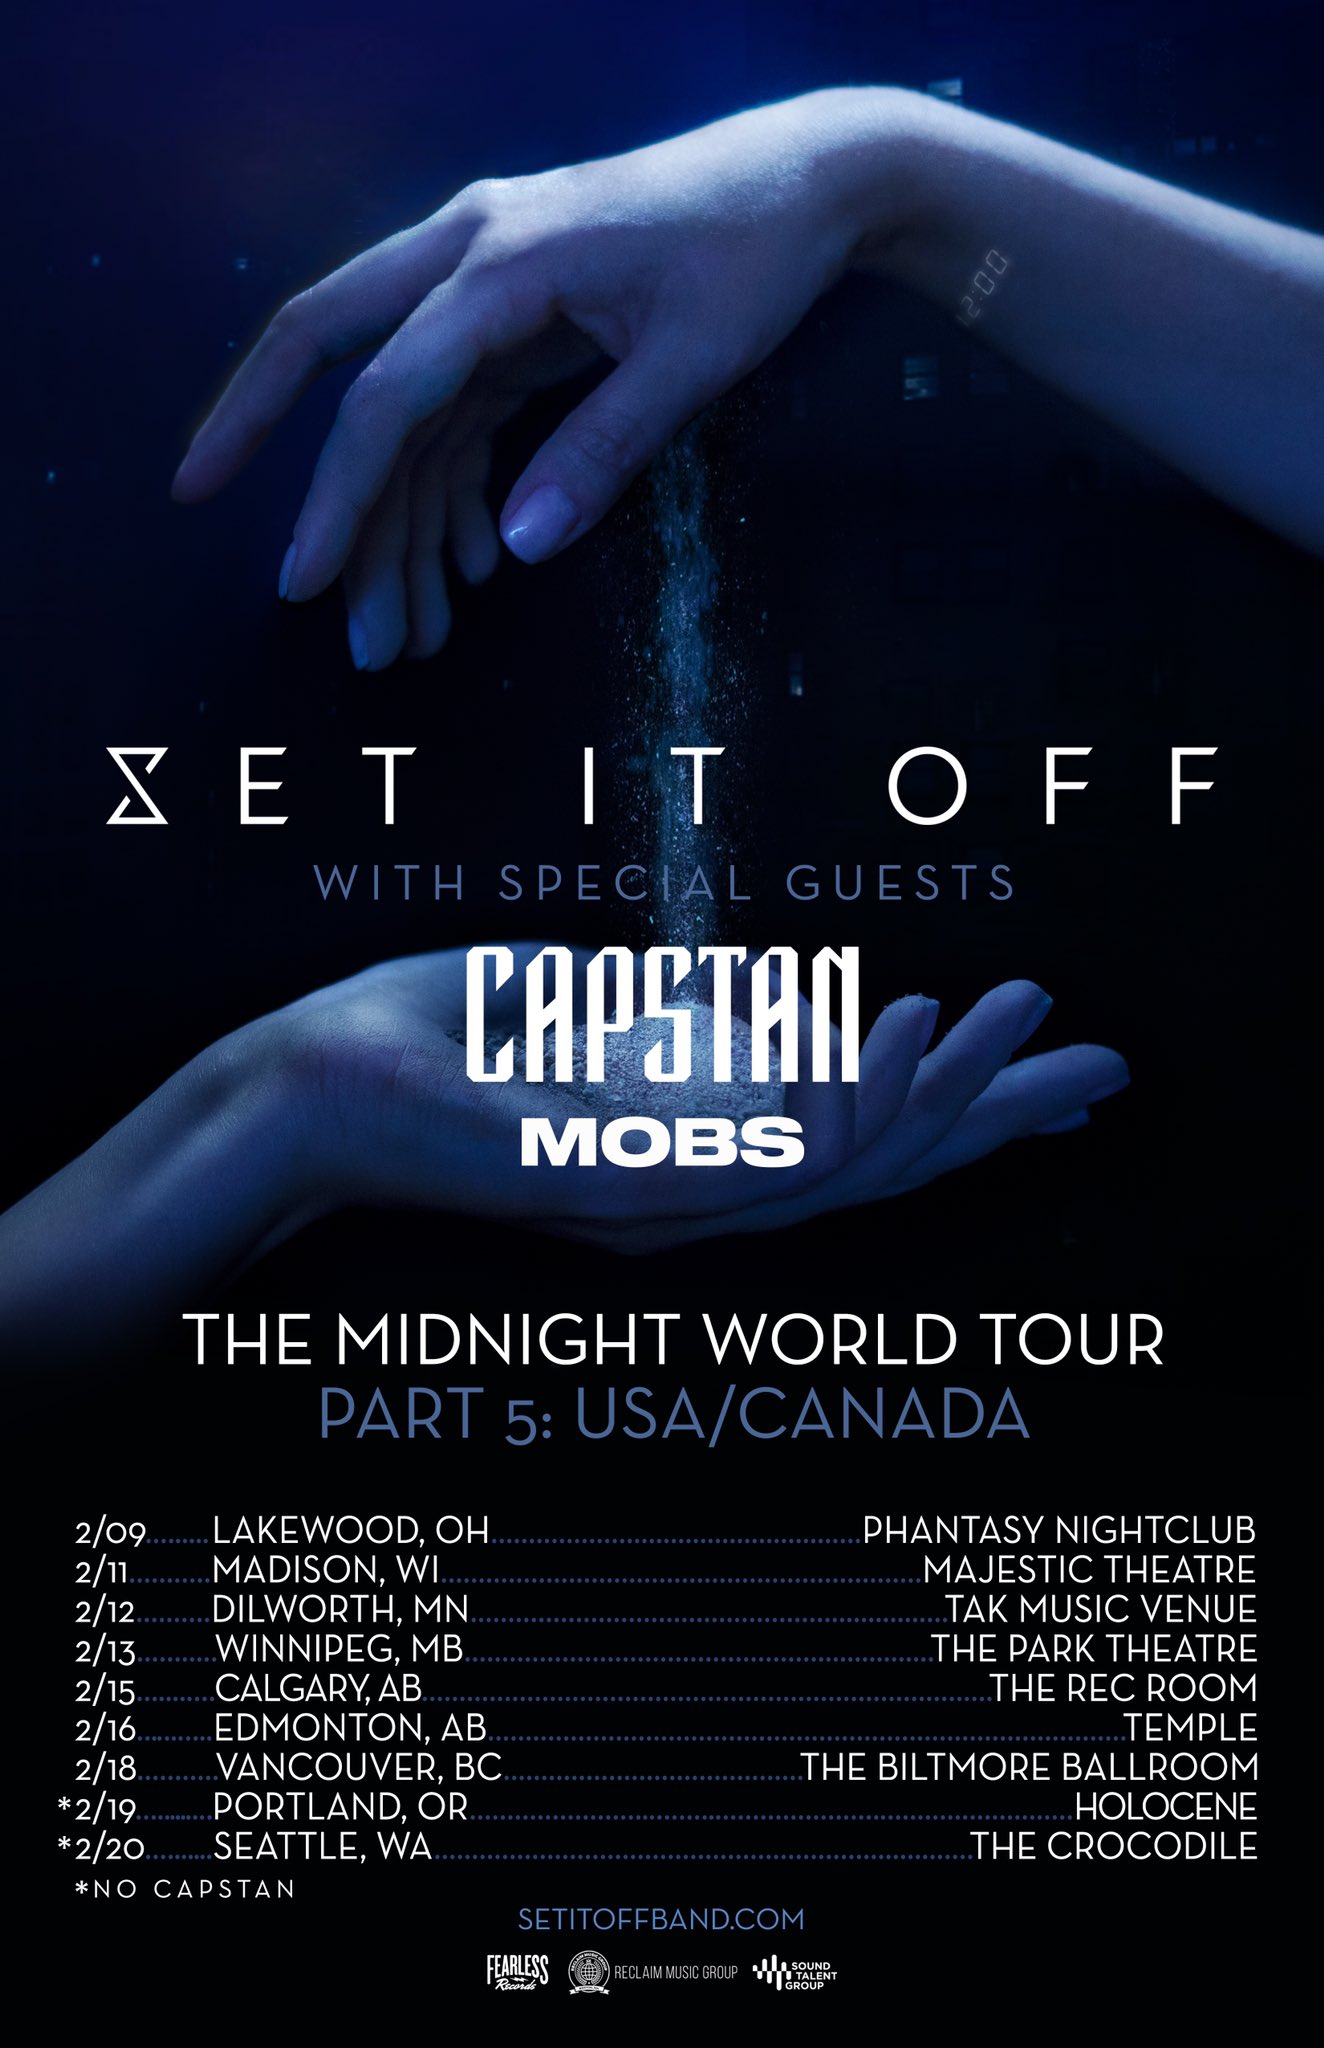 Set It Off on X: THE MIDNIGHT WORLD TOUR PART 5: USA/CANADA